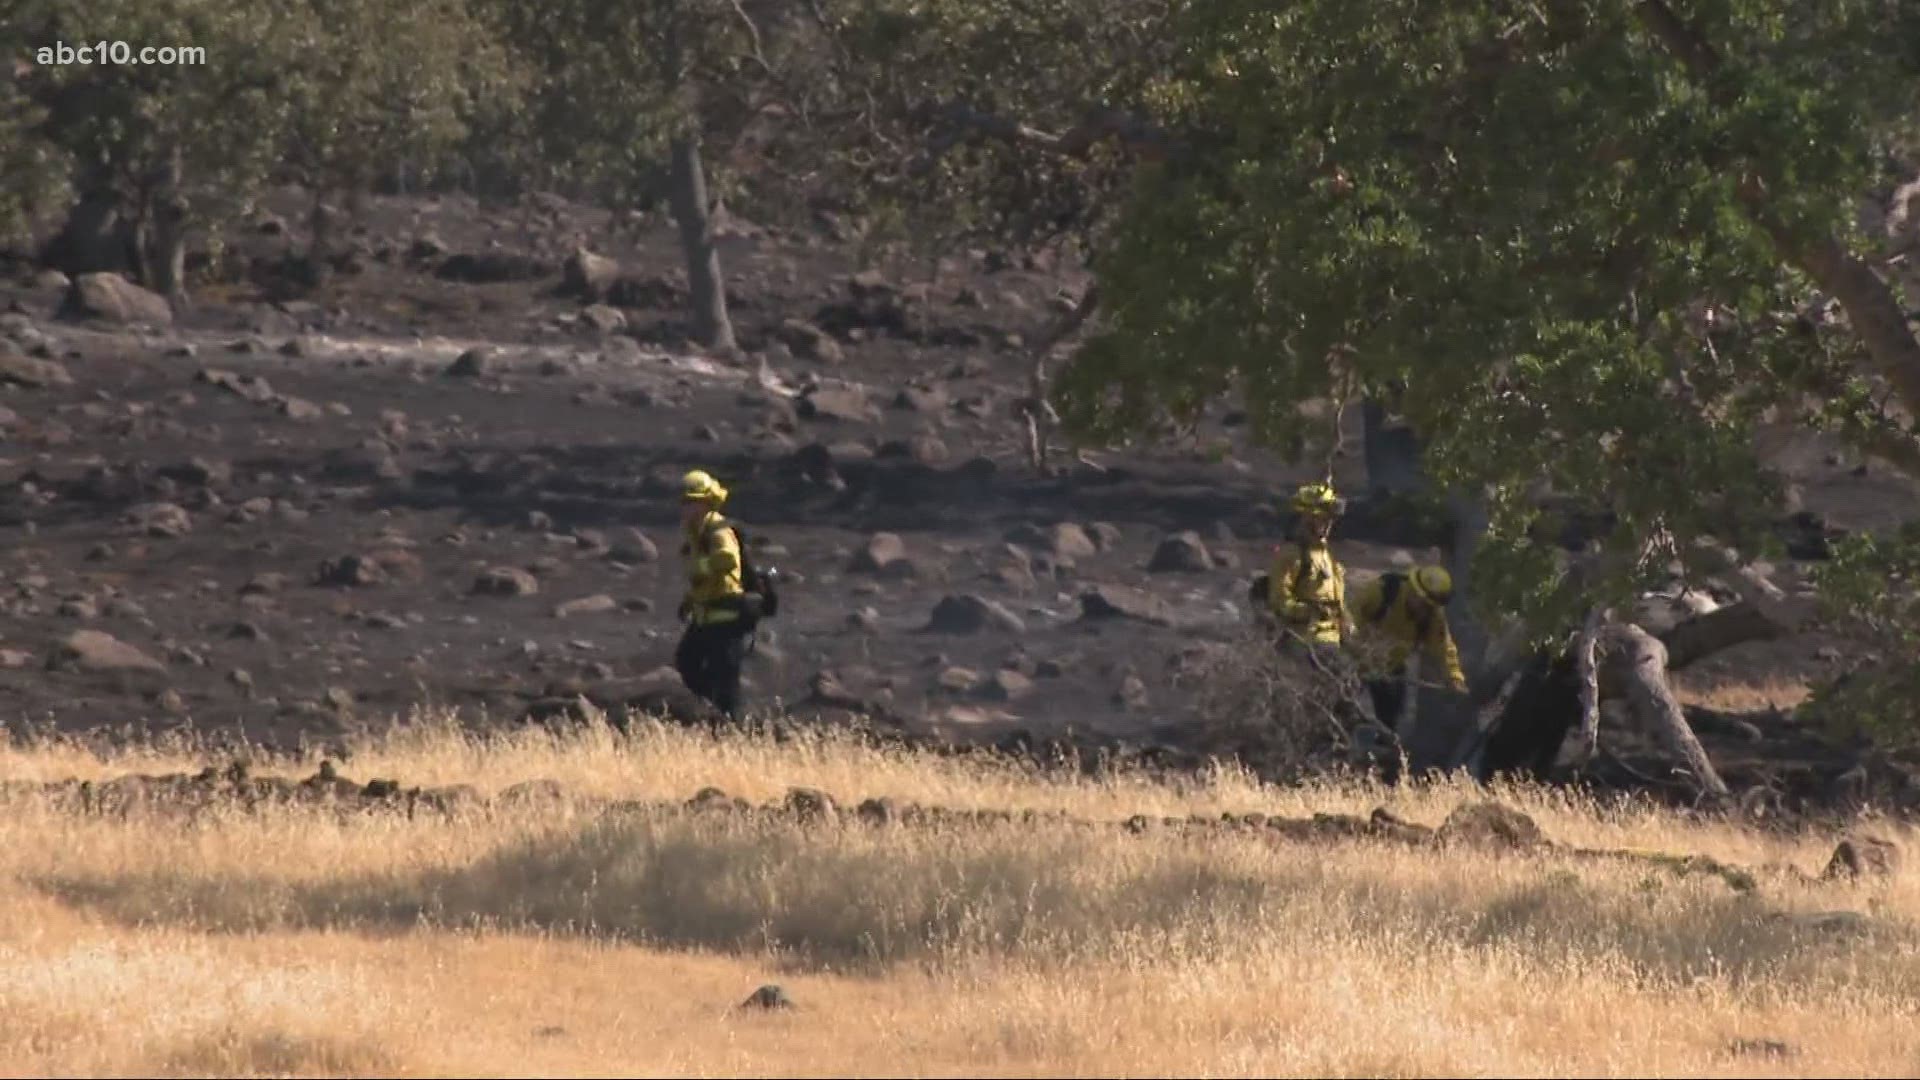 The Park Fire, burning near Upper Bidwell Park, grew to 600 acres overnight, with fire crews containing about 25%.